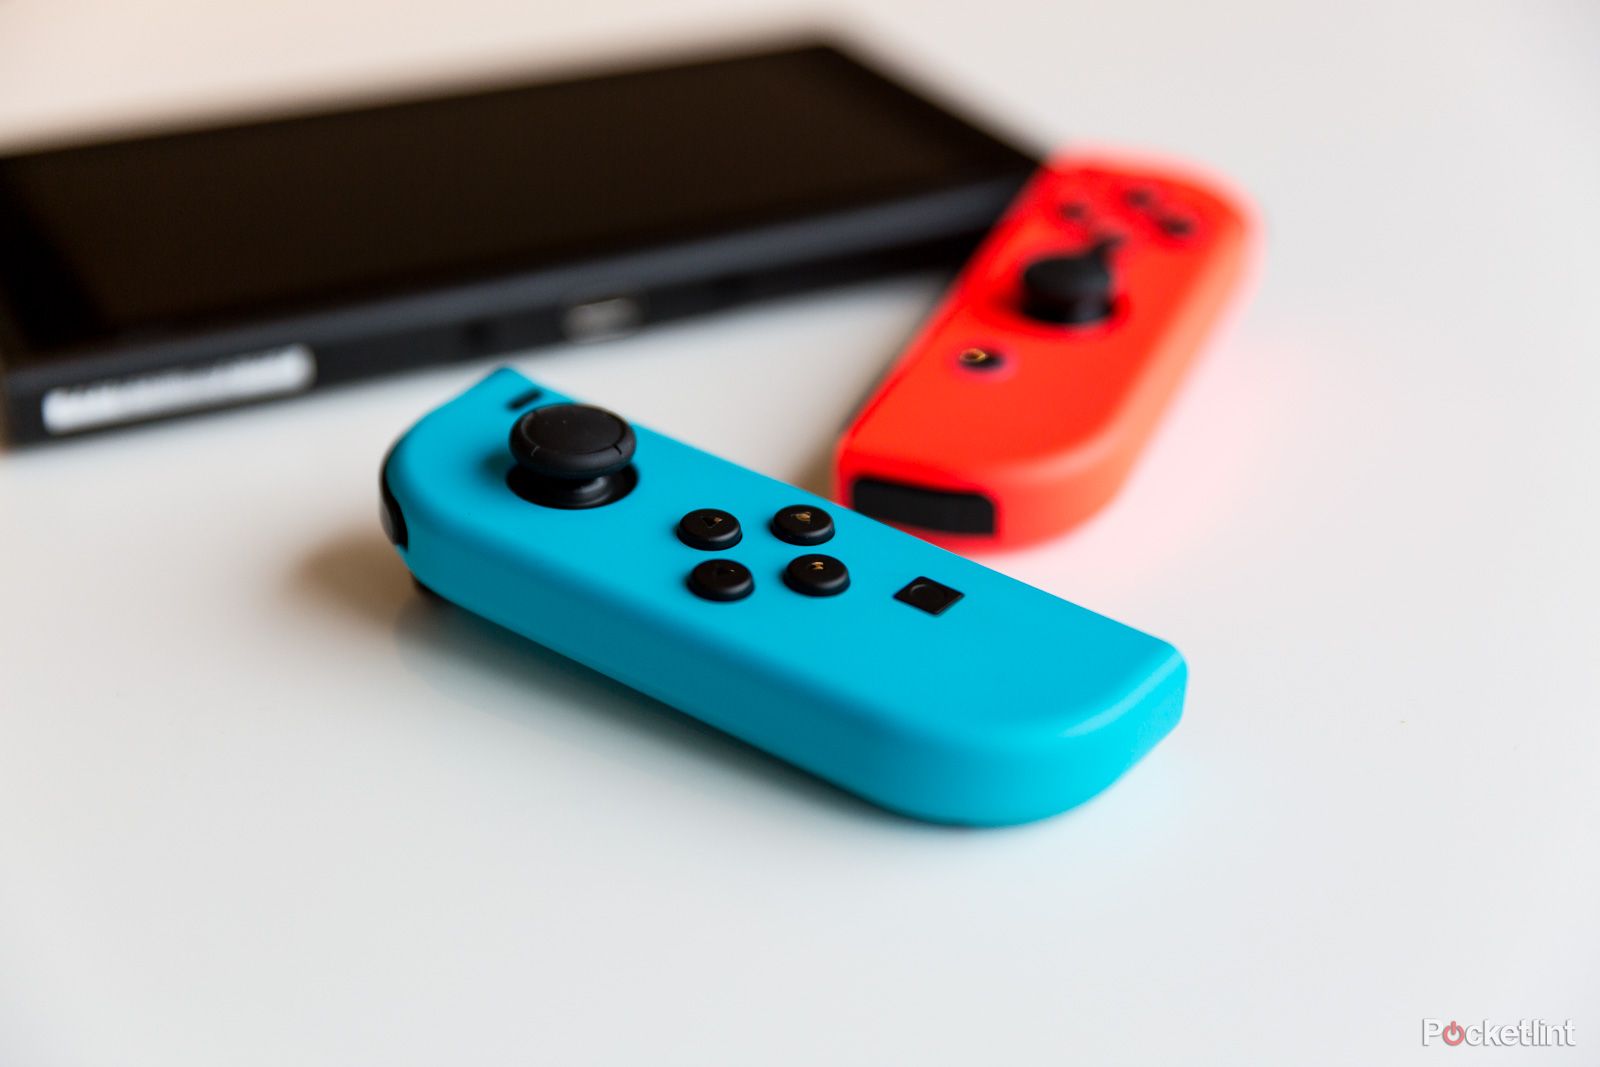 Nintendo Switch red and blue Joy-Cons